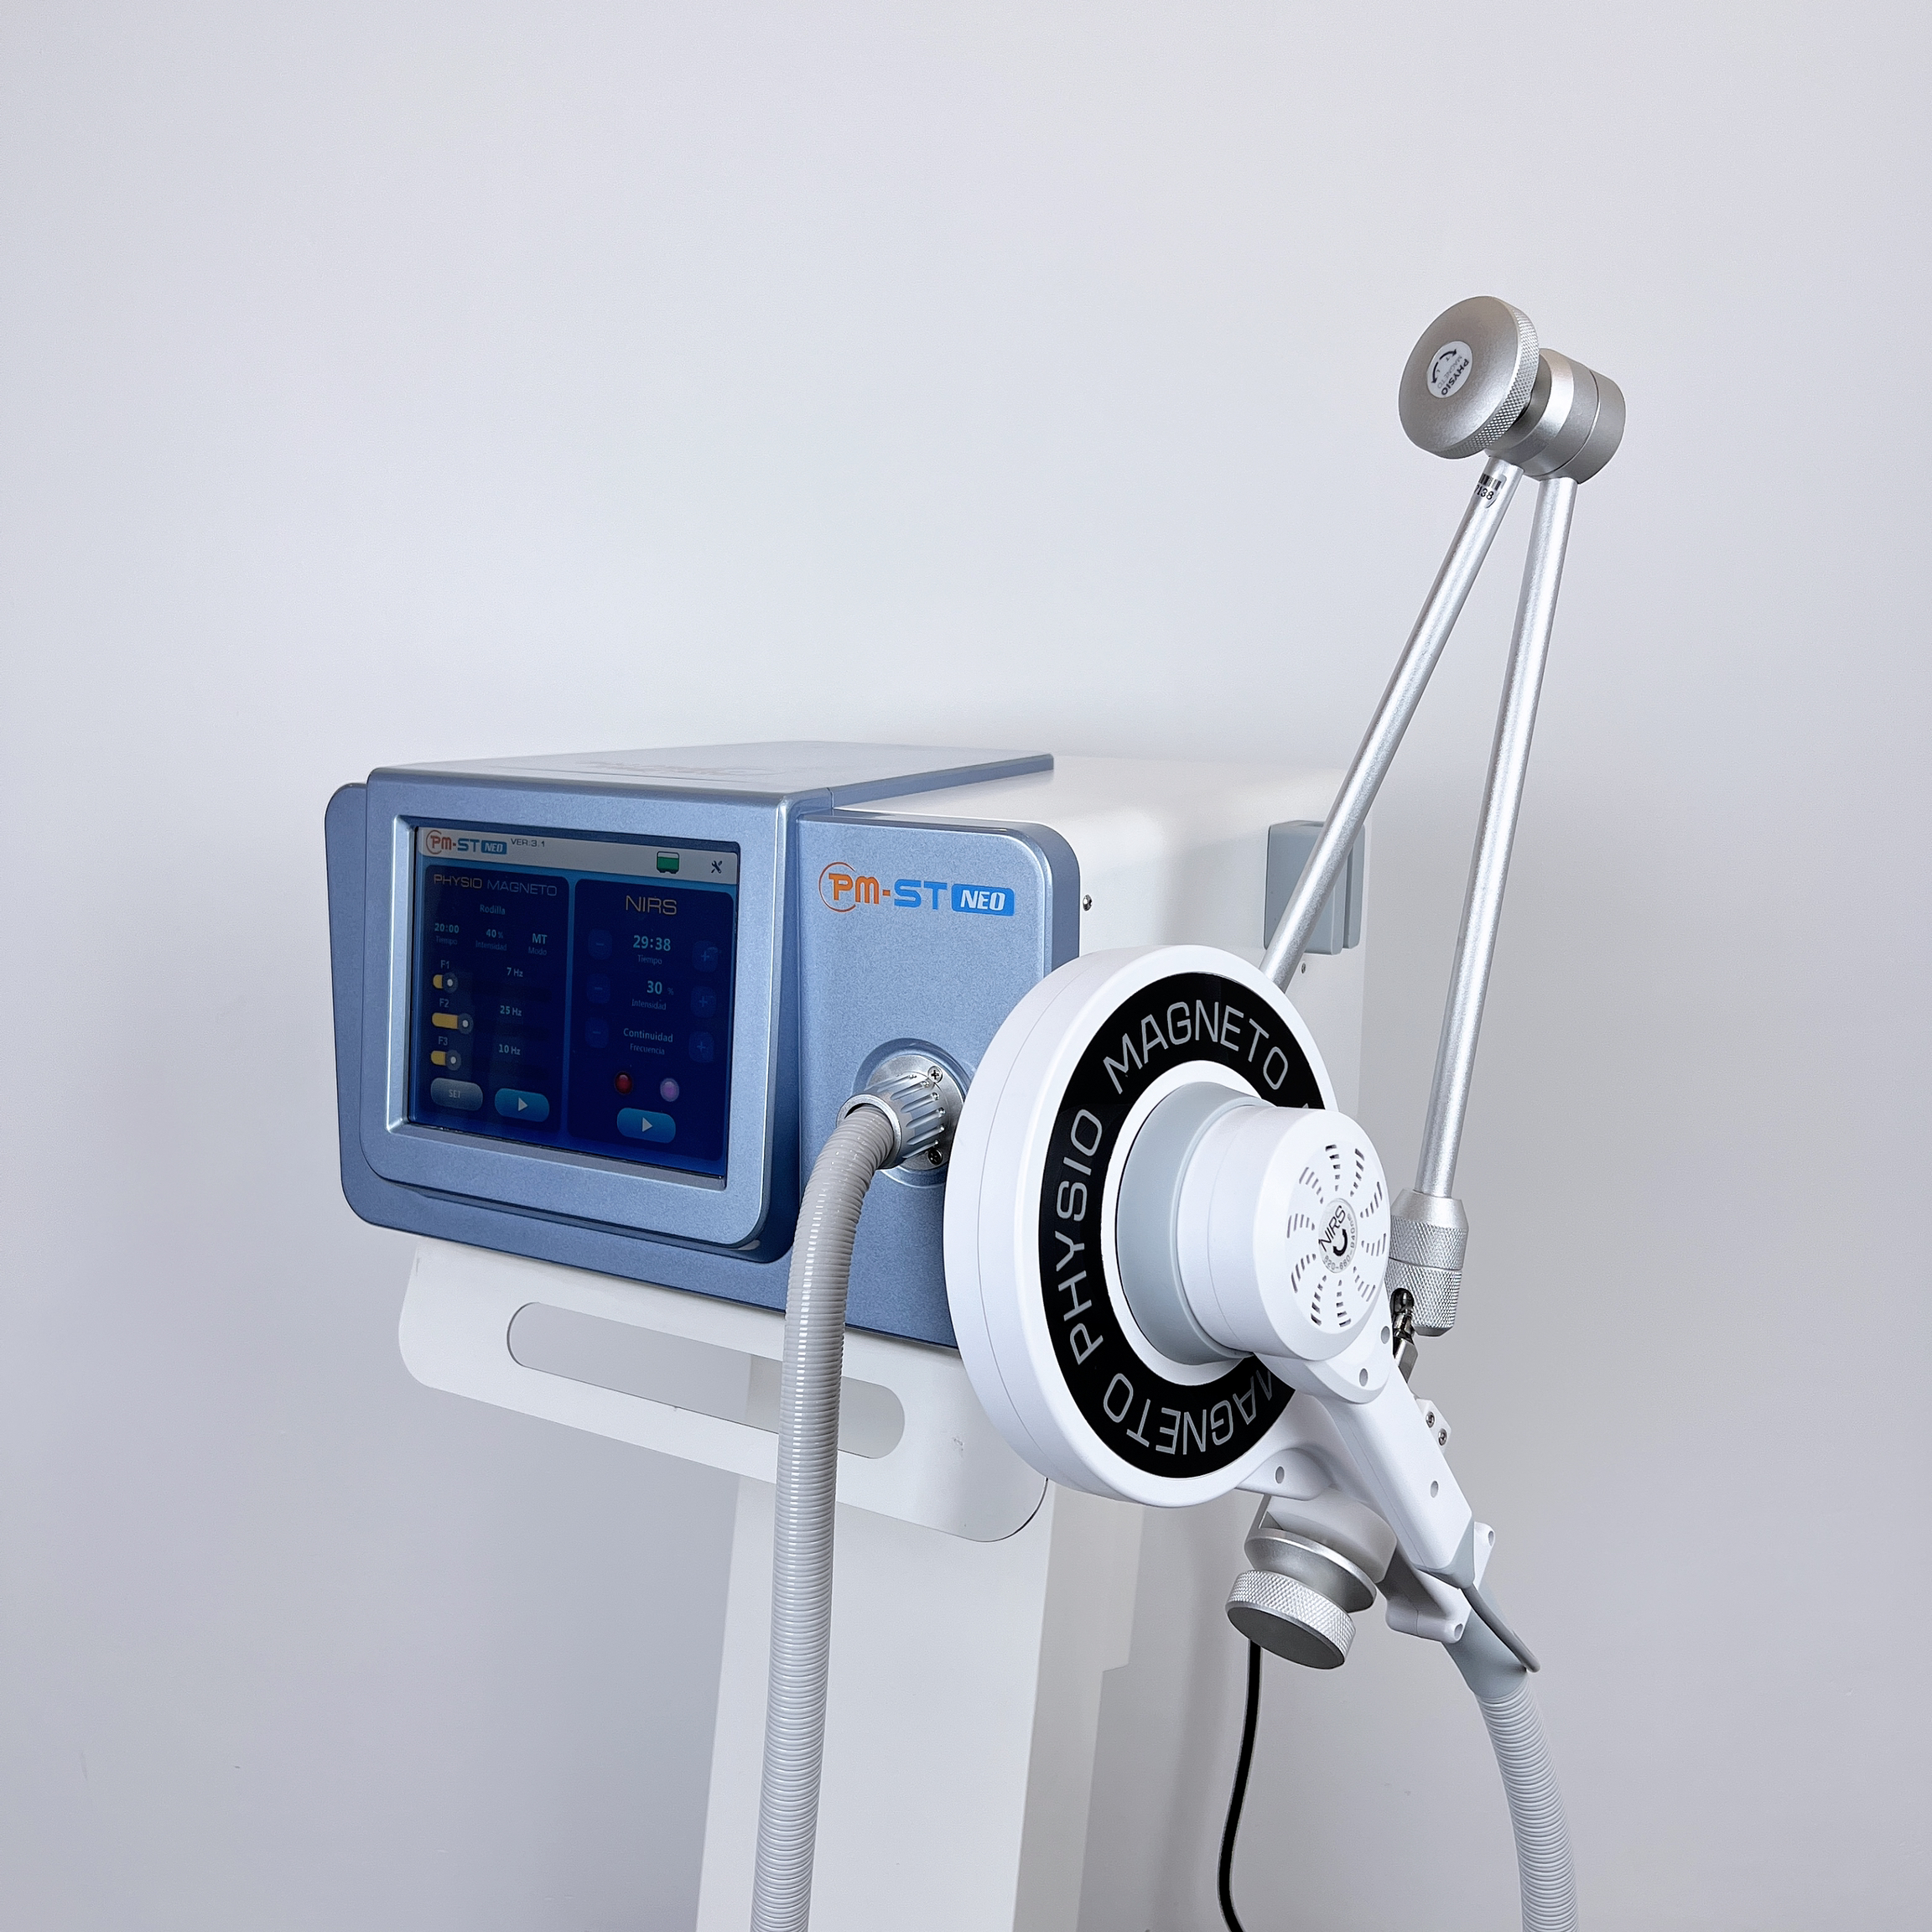 Pain Relief Physio Magneto Super Transduction Machine Pulsed NIRS Near Infrared Therapy With 980NM Red Right For Tissue Recovery